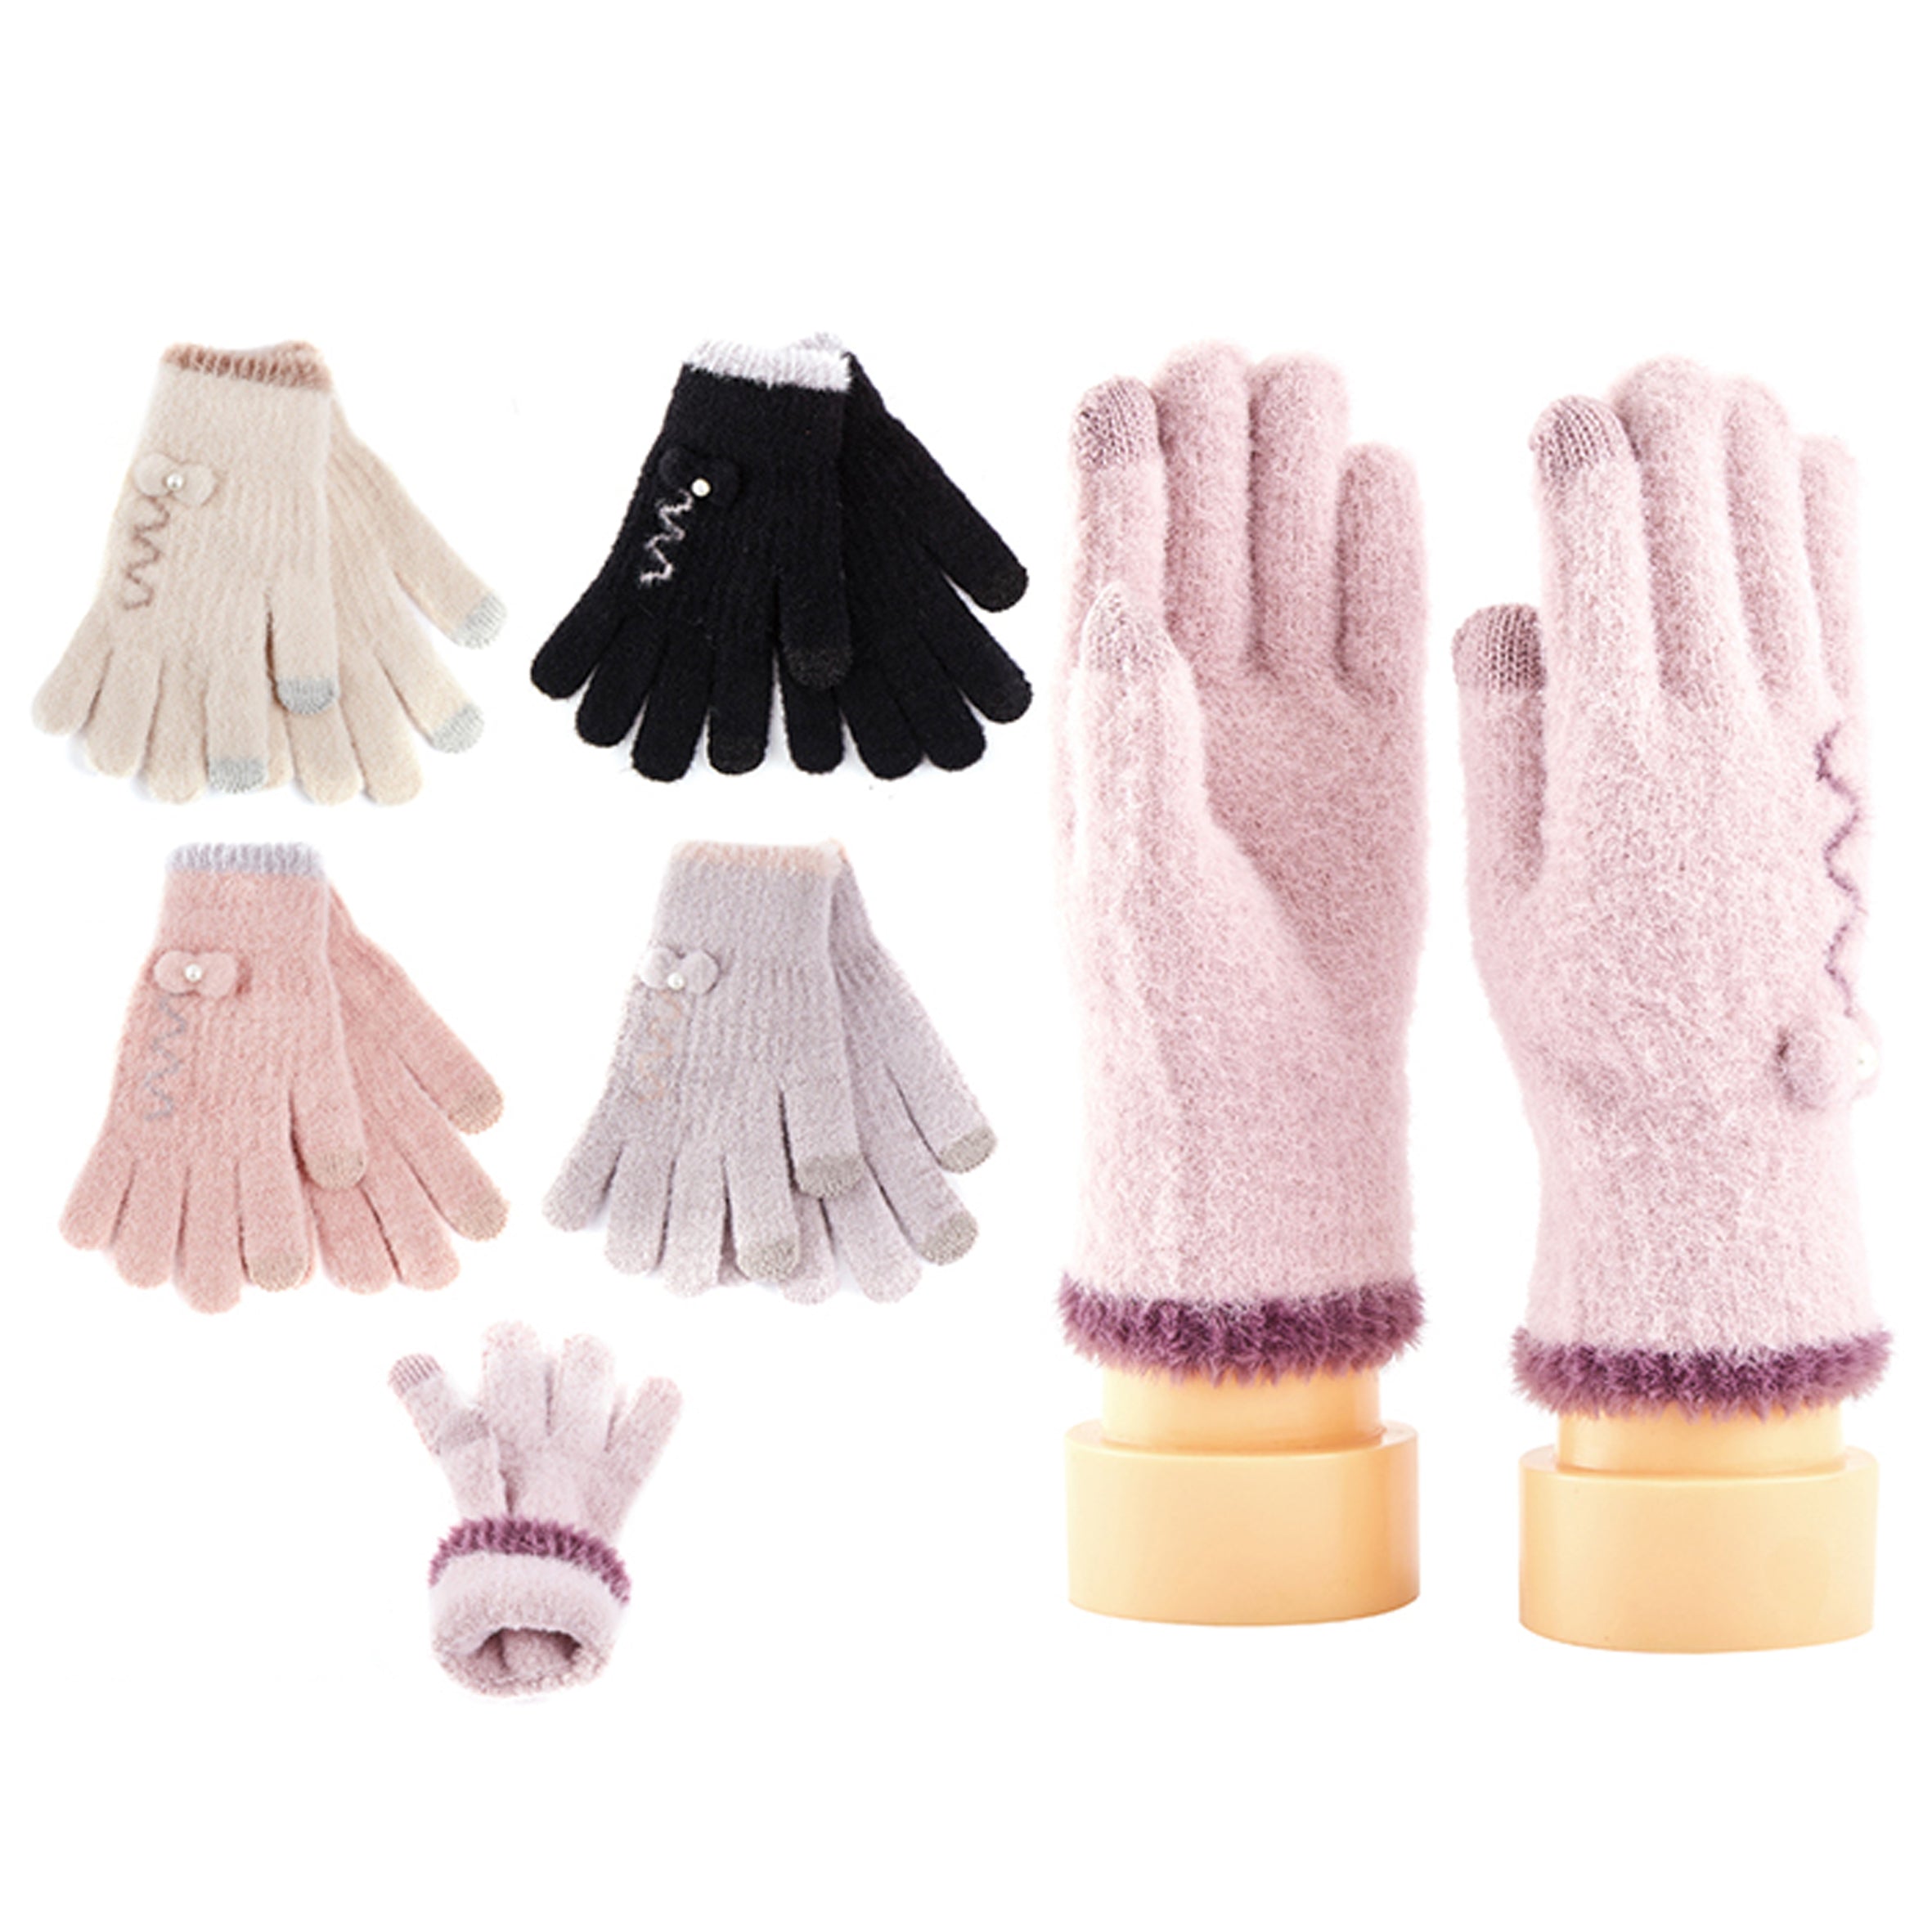 Wholesale CLOTHING Accessories Women's Glove Knit Gloves NH264